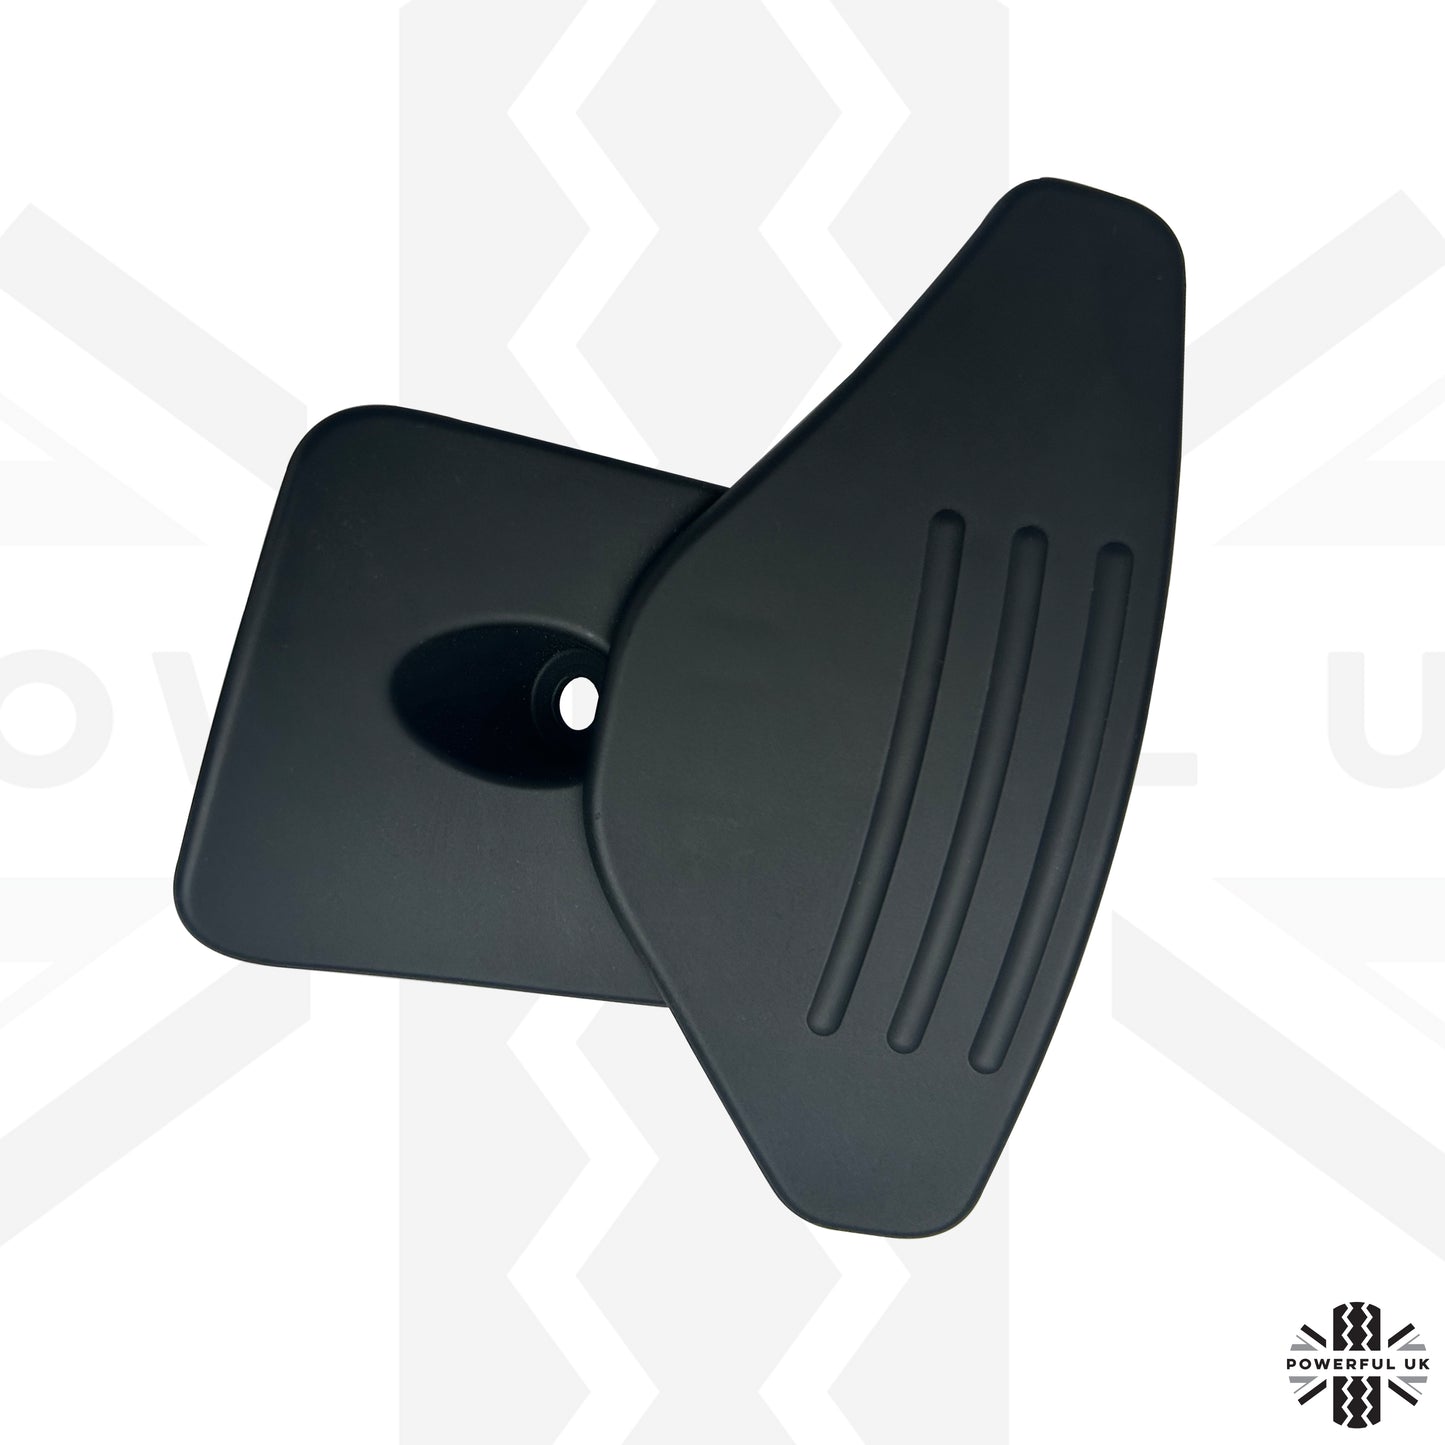 Black Paddle Shifts for Range Rover L405 - Pair